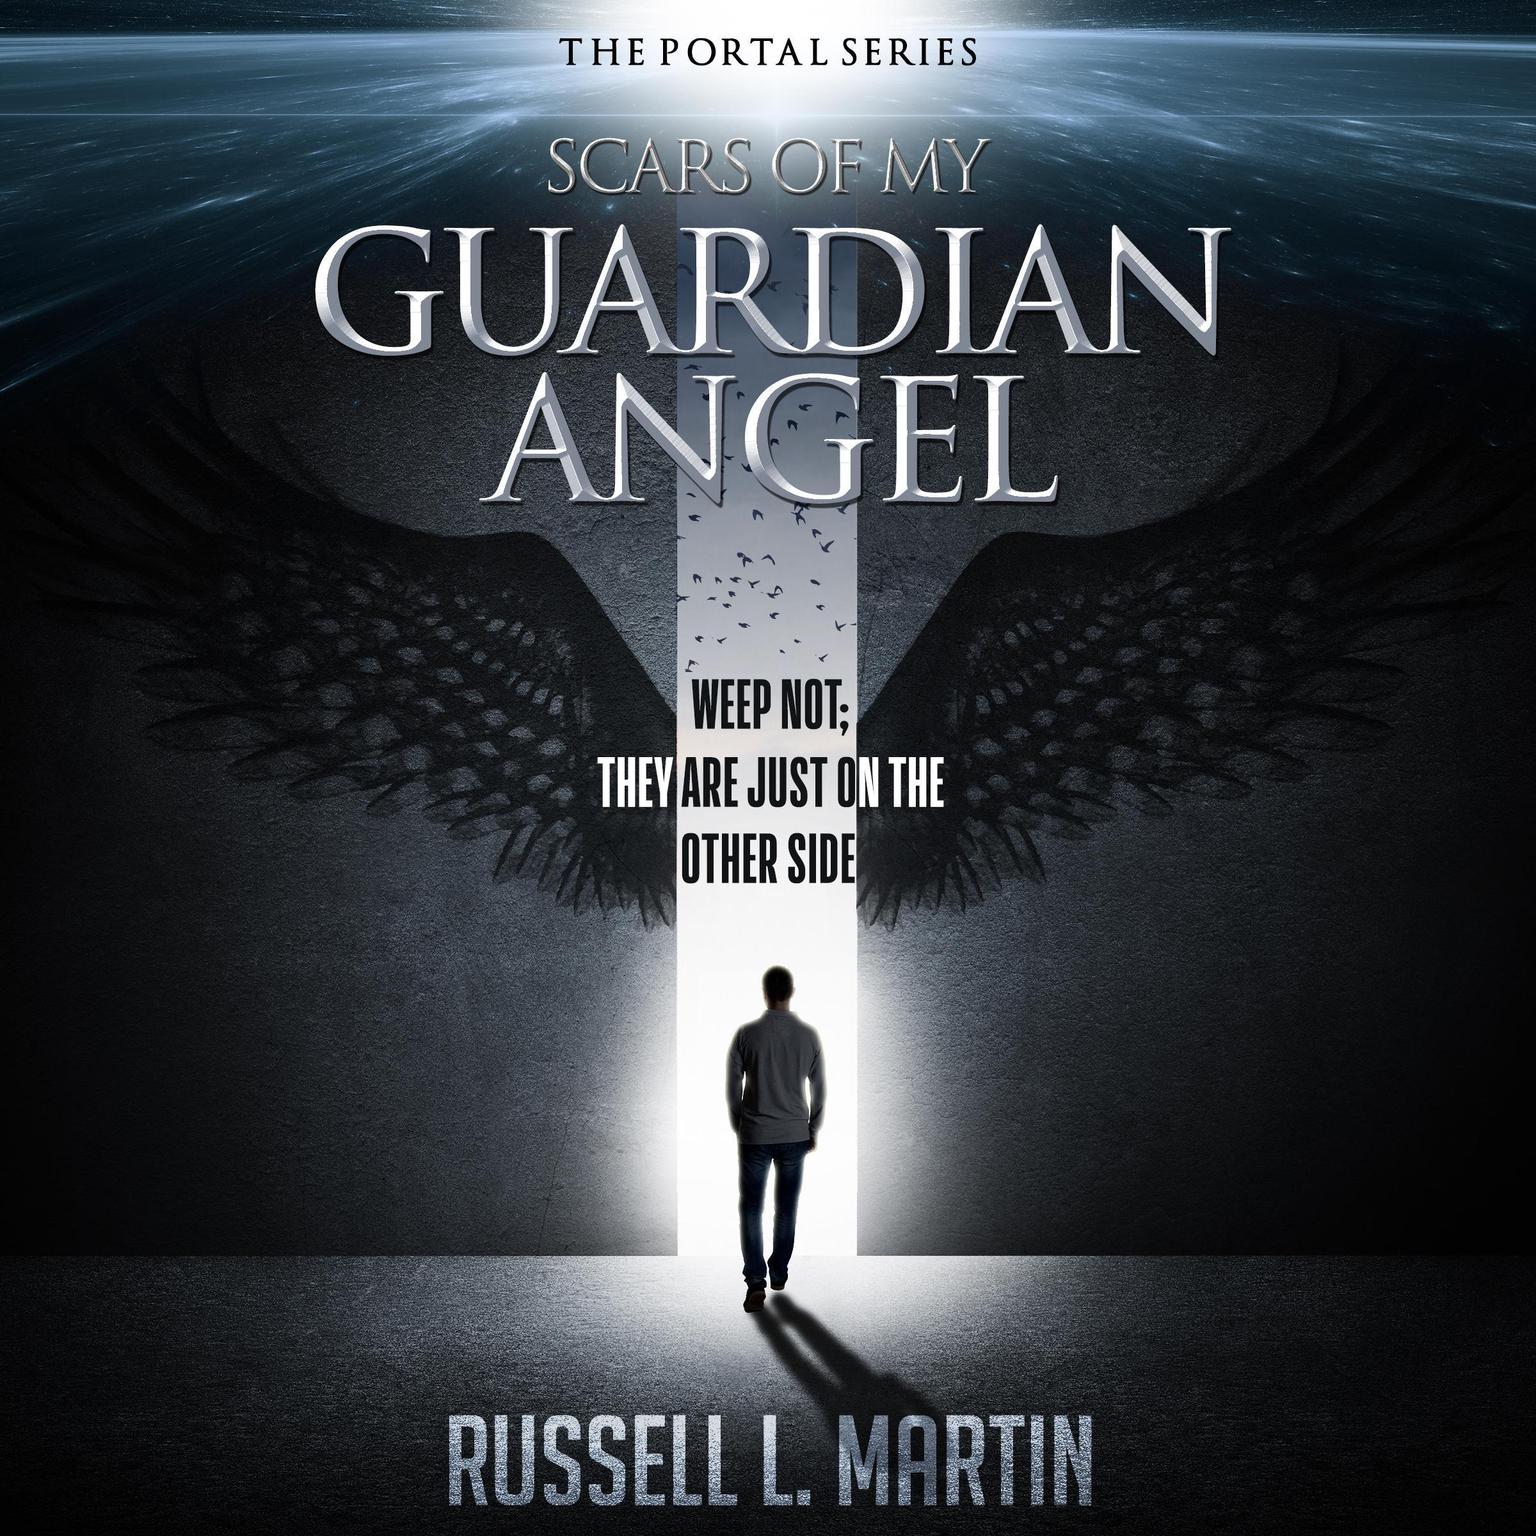 Scars of My Guardian Angel - Weep Not; They Are Just on the Other Side: Weep Not; They Are Just on the Other Side Audiobook, by Russell L. Martin